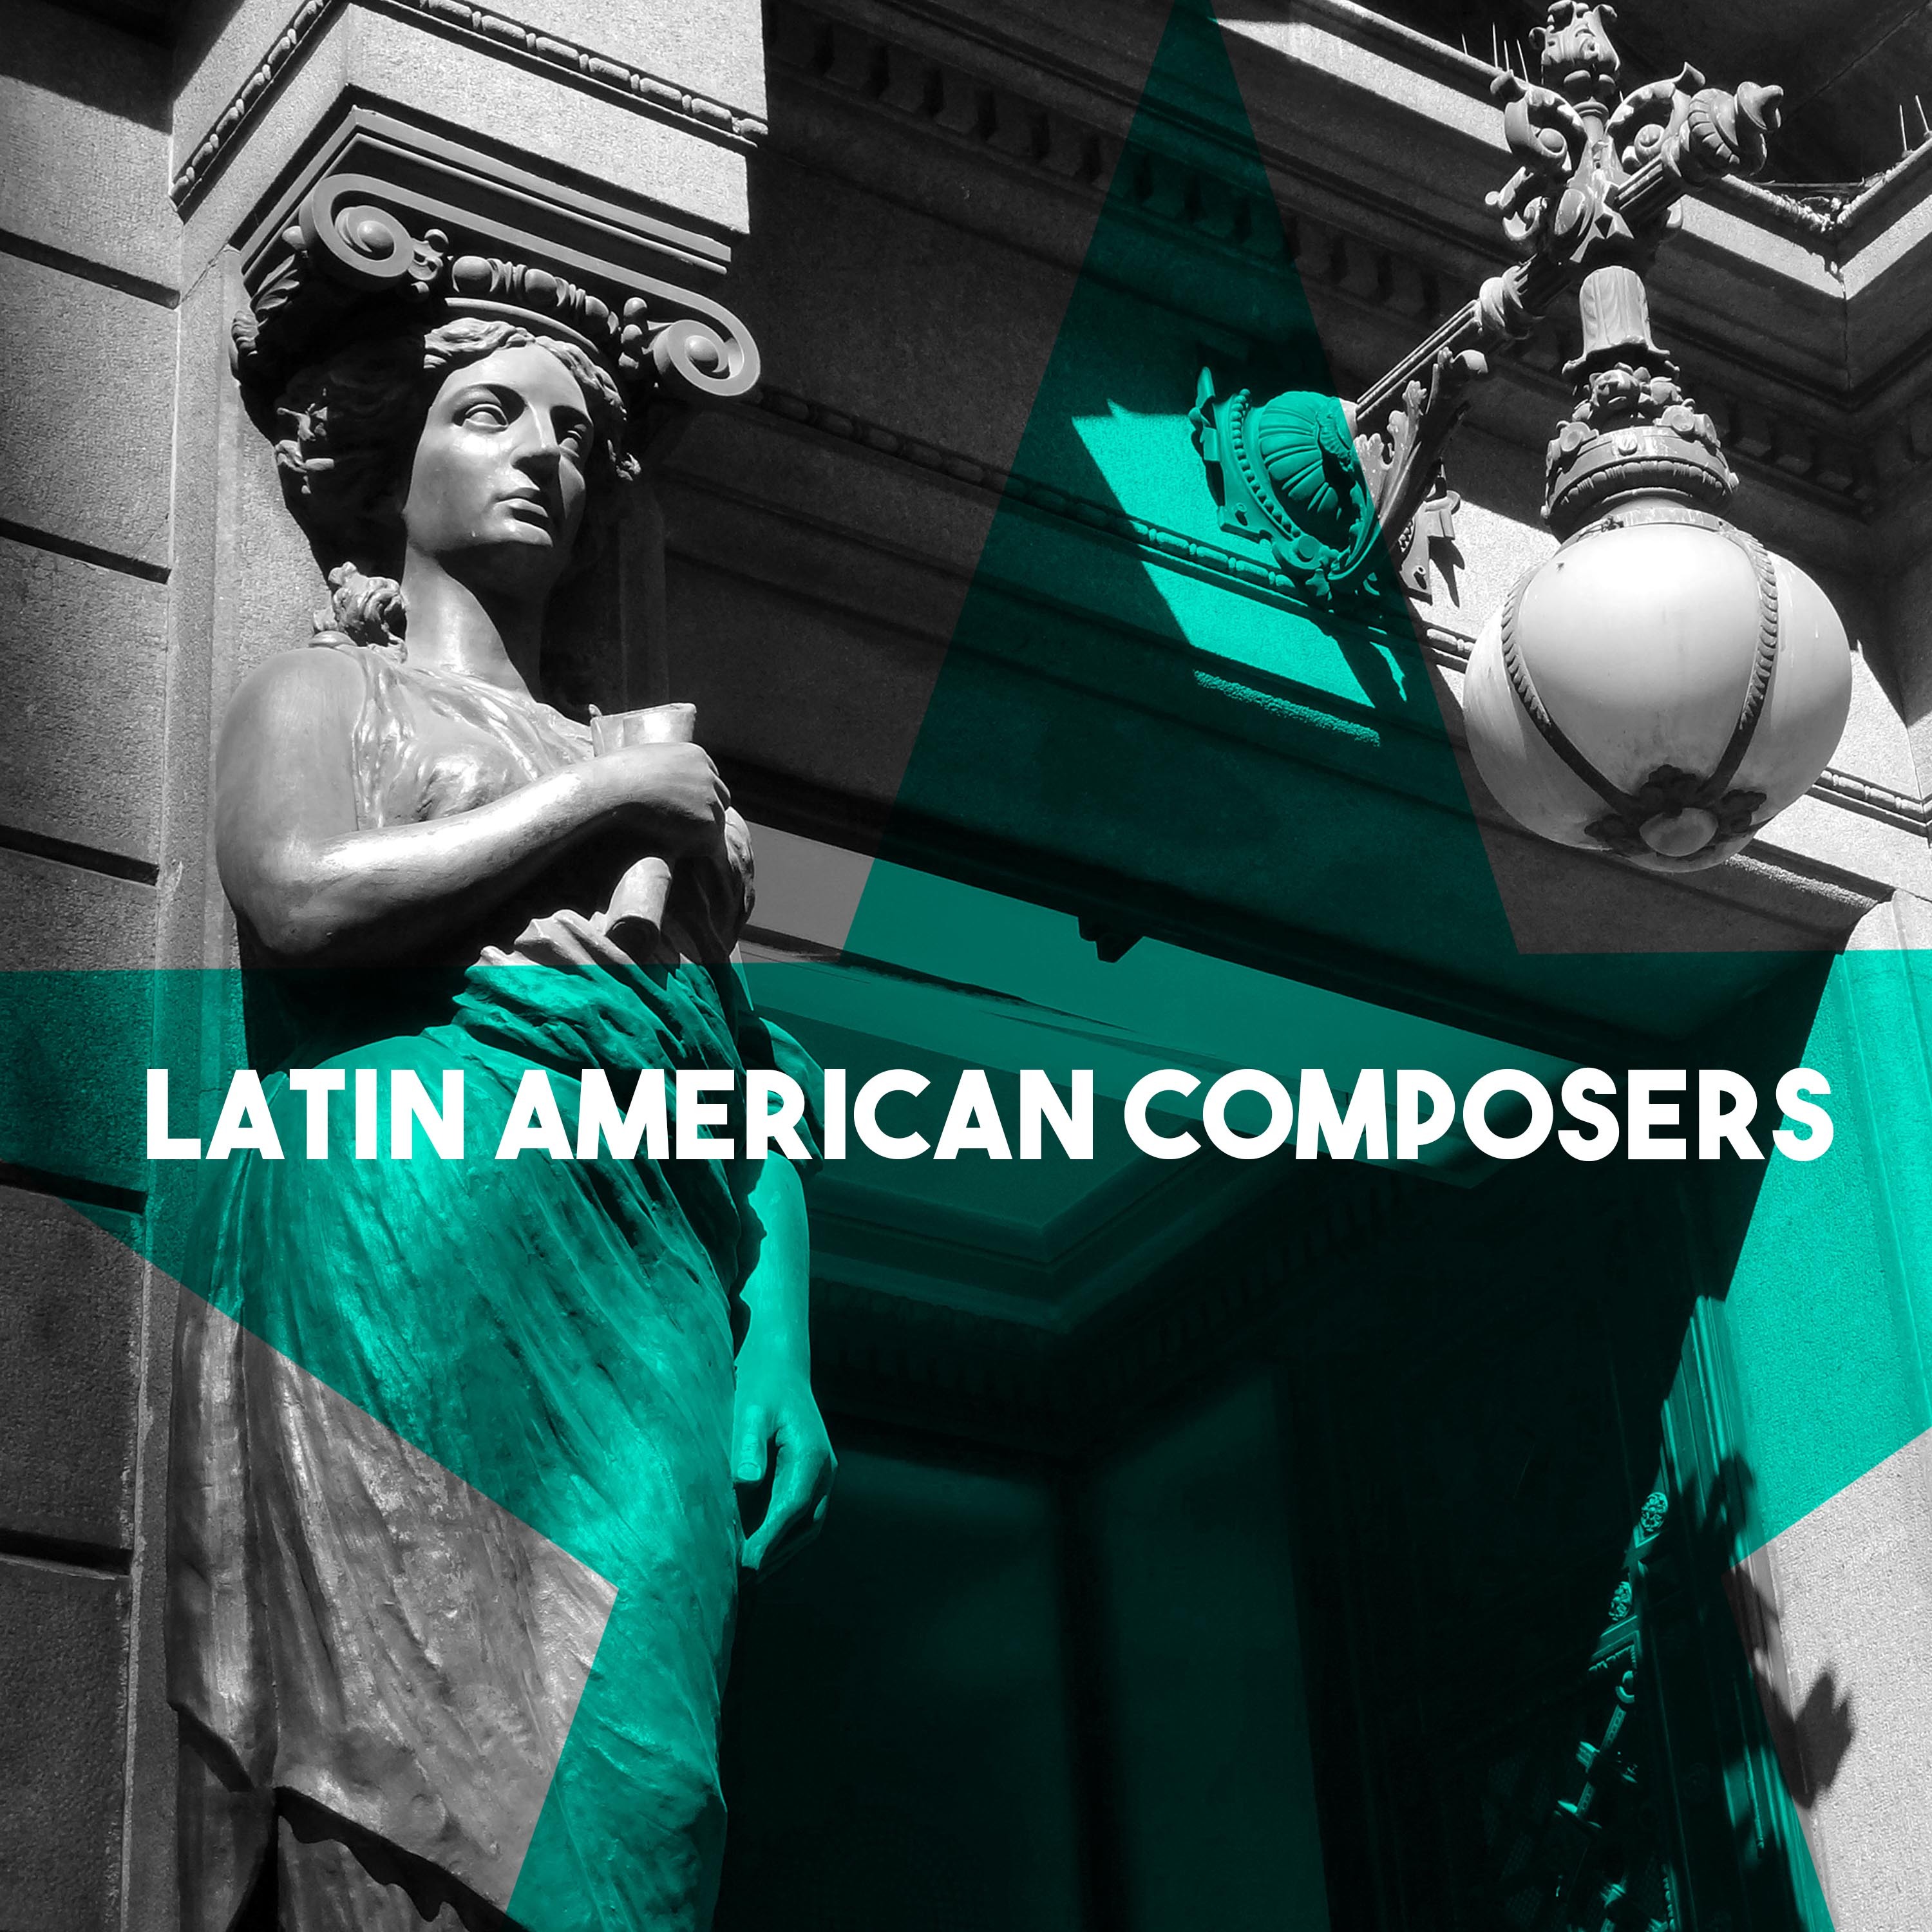 Latin American Composers